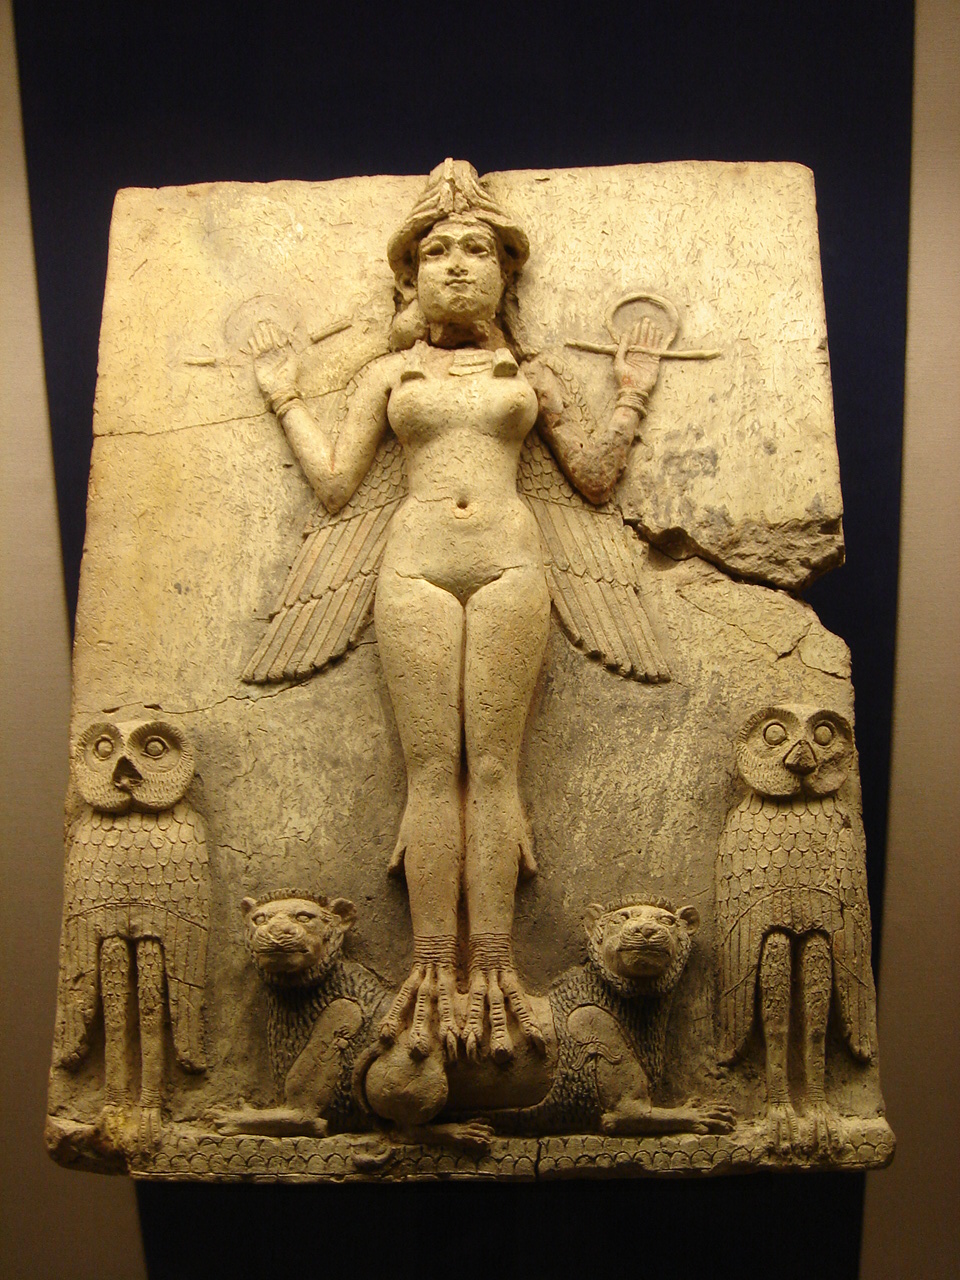 The Queen of the Night relief The figure could be an aspect of the goddess Ishtar Babylonian goddess of sex and love